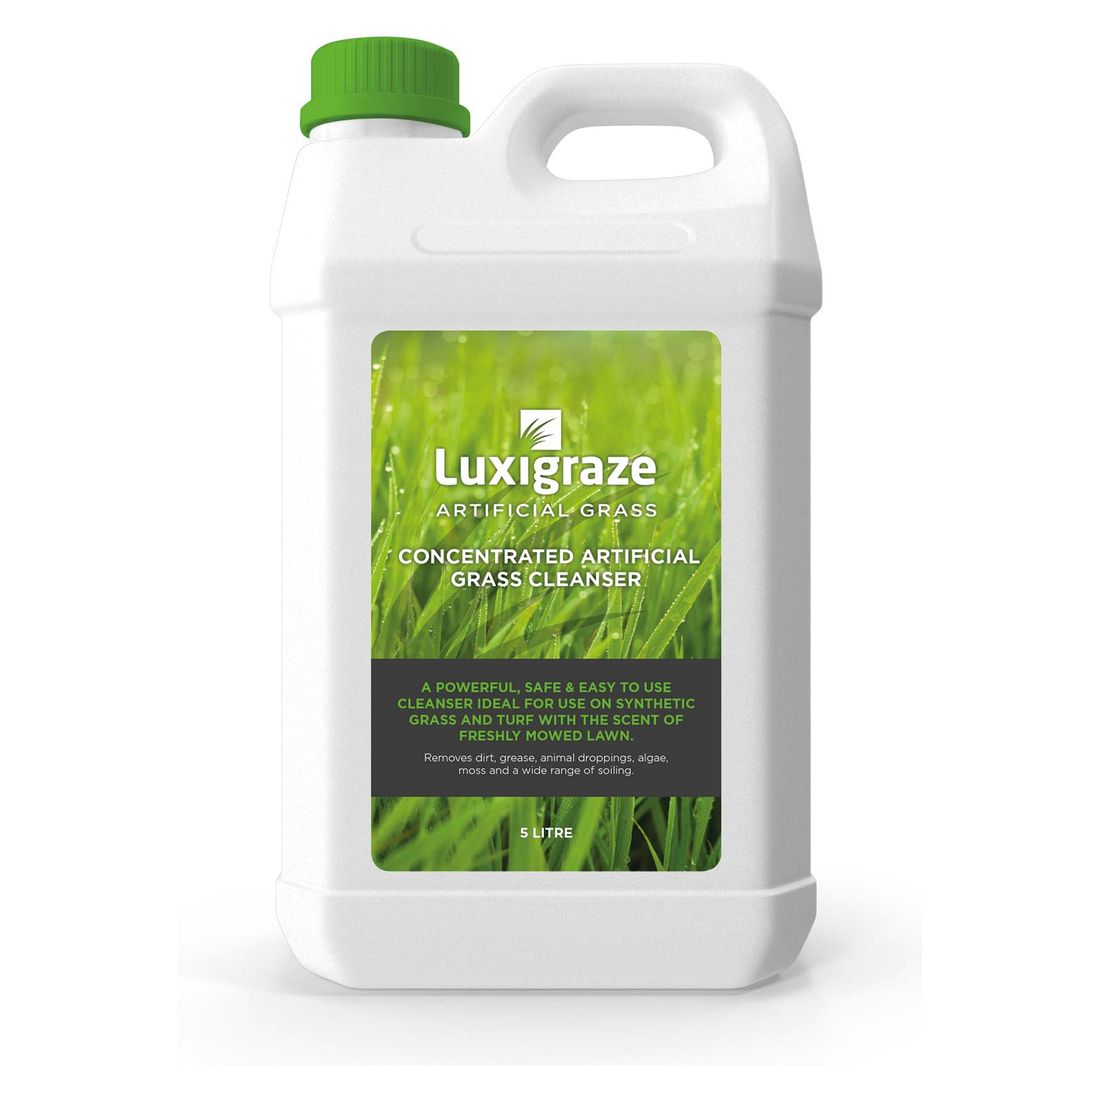 Luxigraze Artificial Grass Concentrated Cleanser 5L